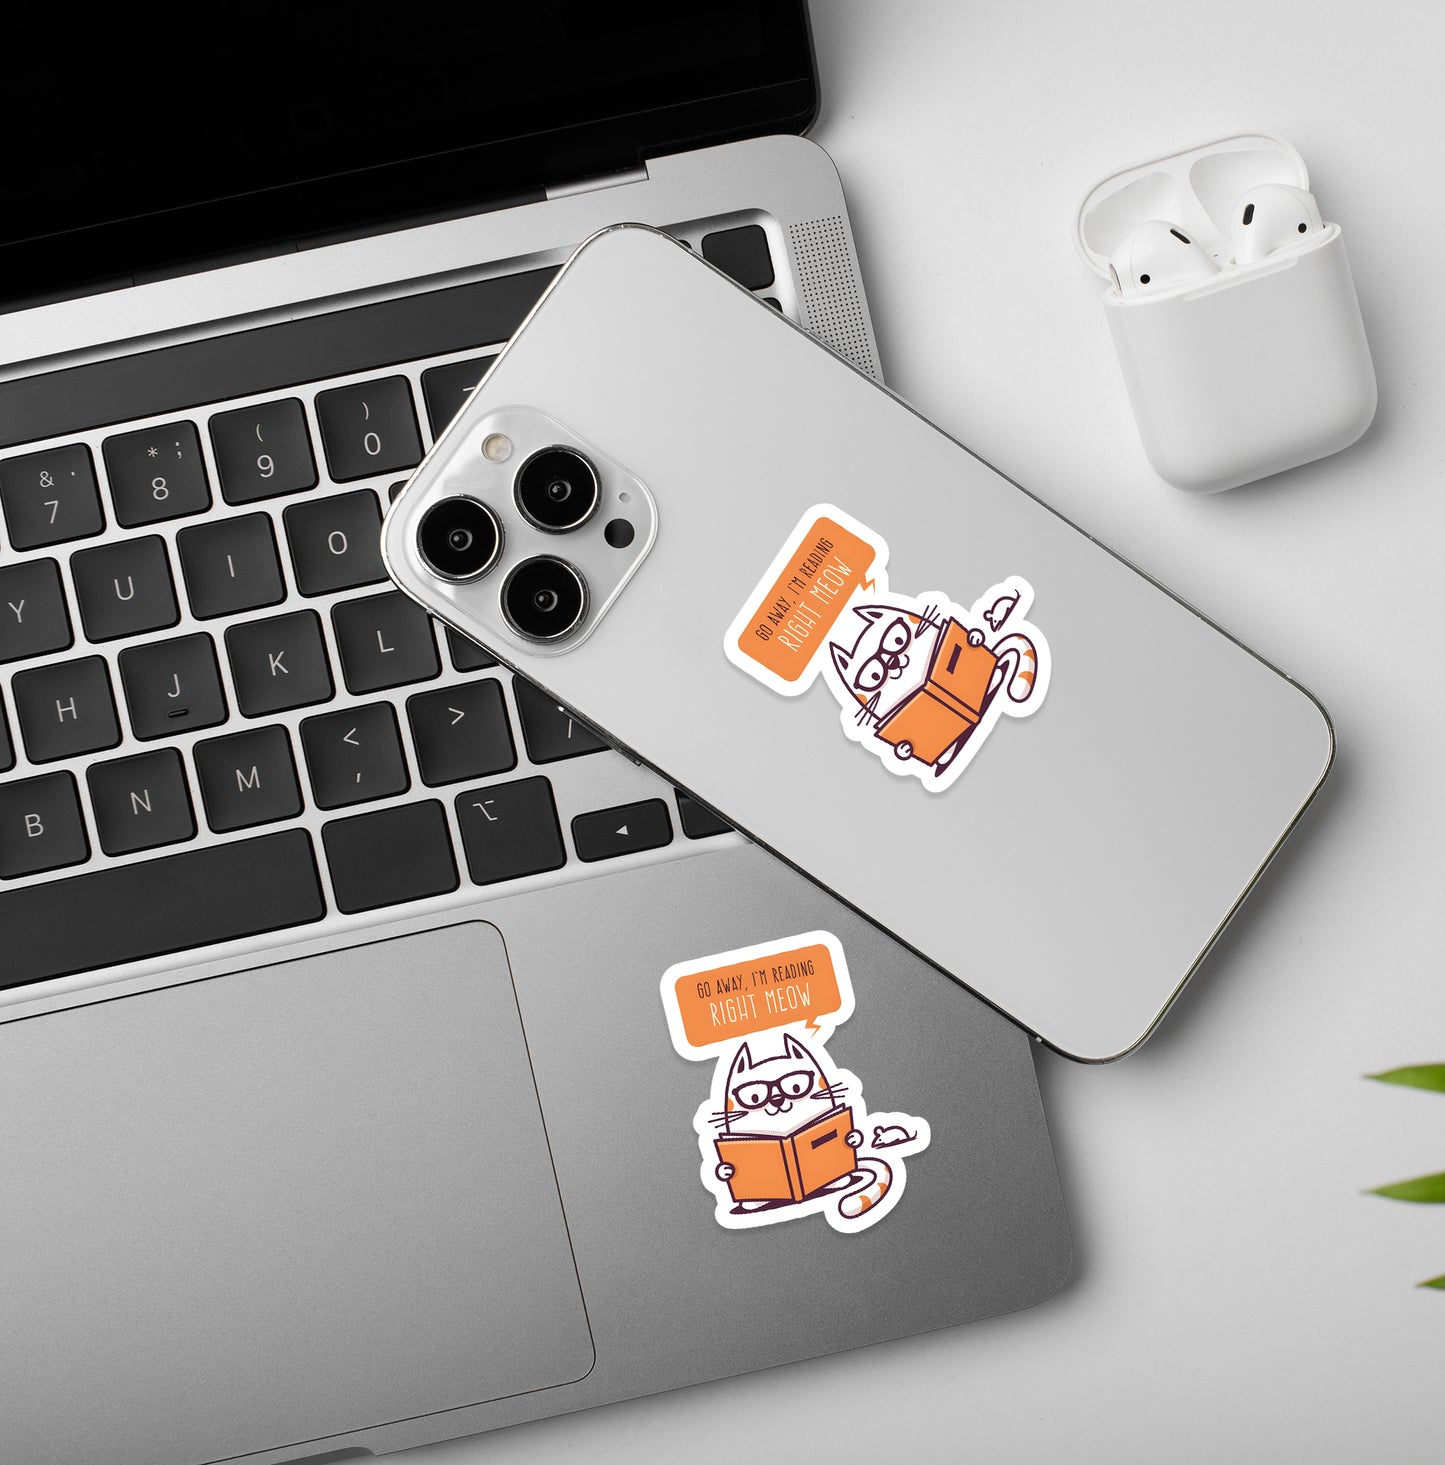 I'm Reading Right Now - Laptop & Mobile Stickers